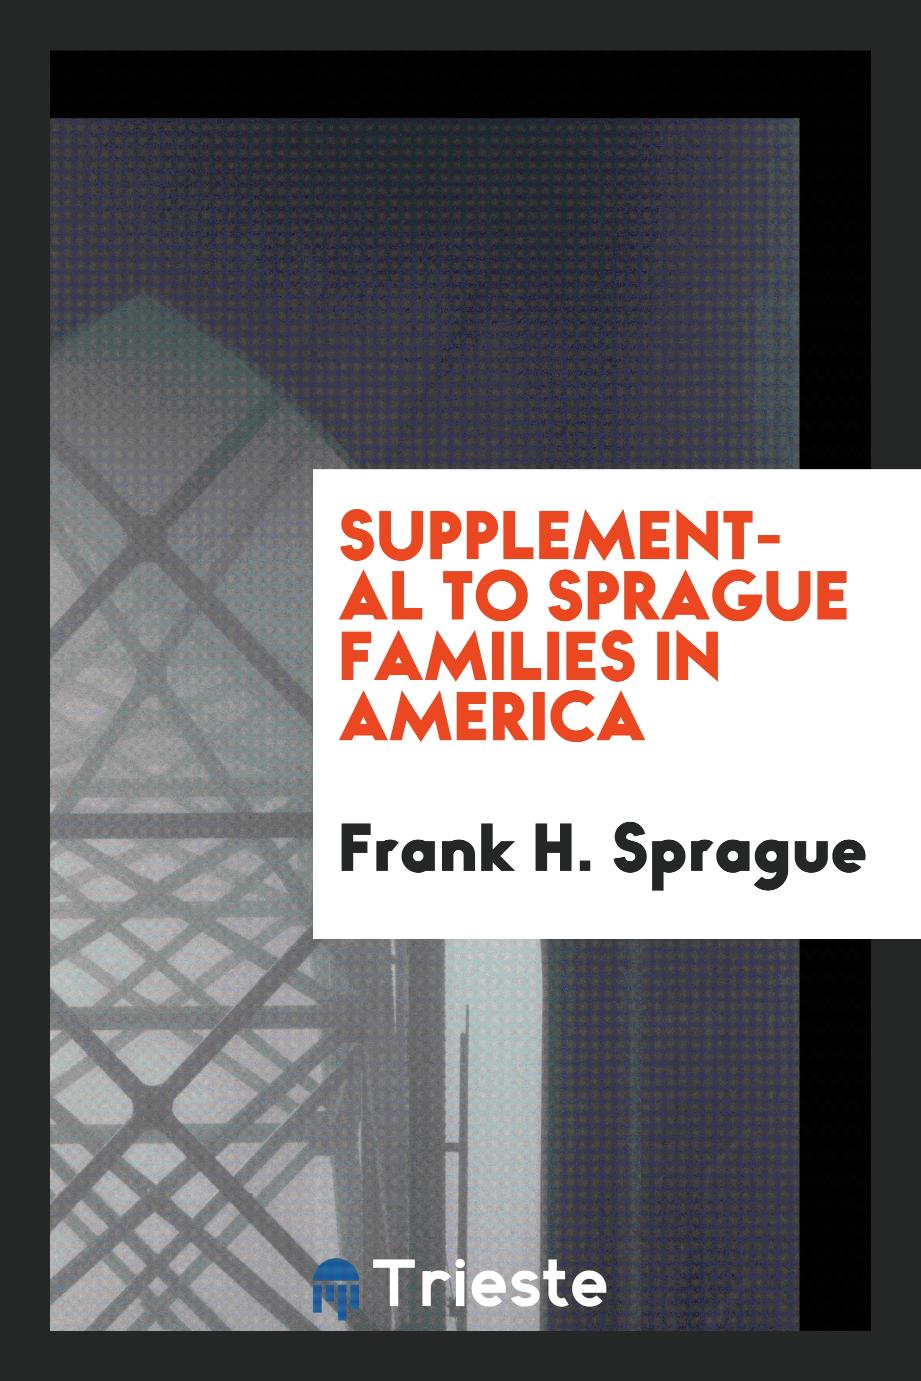 Supplemental to Sprague families in America